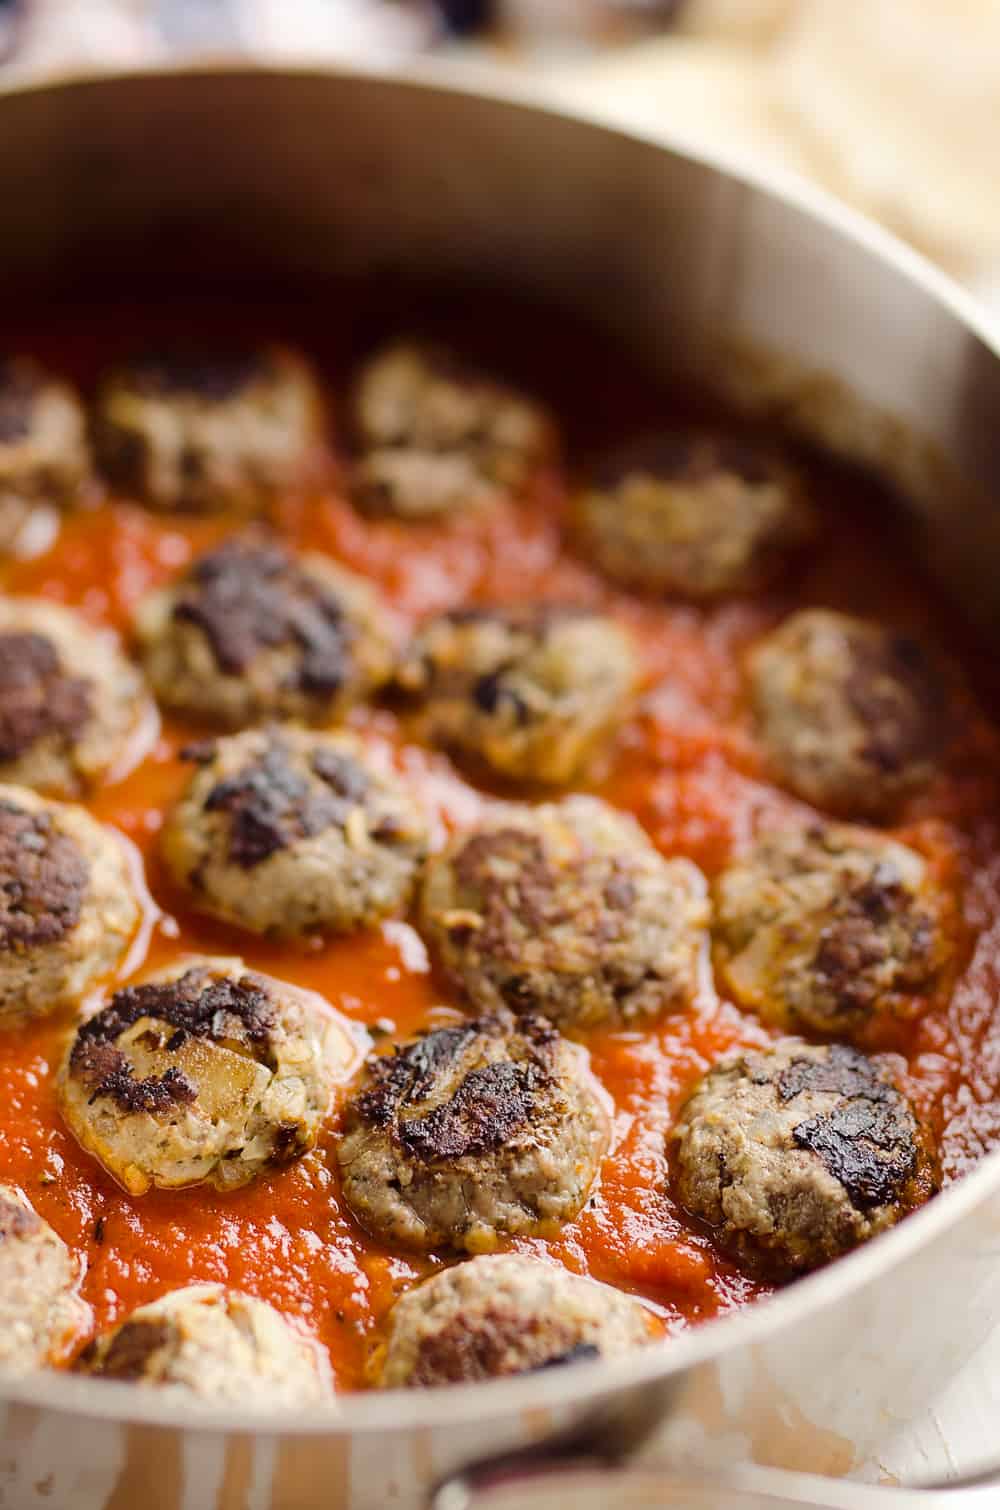 Provolone Stuffed Pesto Meatball Skillet is a hearty dinner made with classic Italian flavors. Provolone cheese is stuffed inside lean hamburger and simmered in marinara for a healthy dinner idea the whole family will love. 